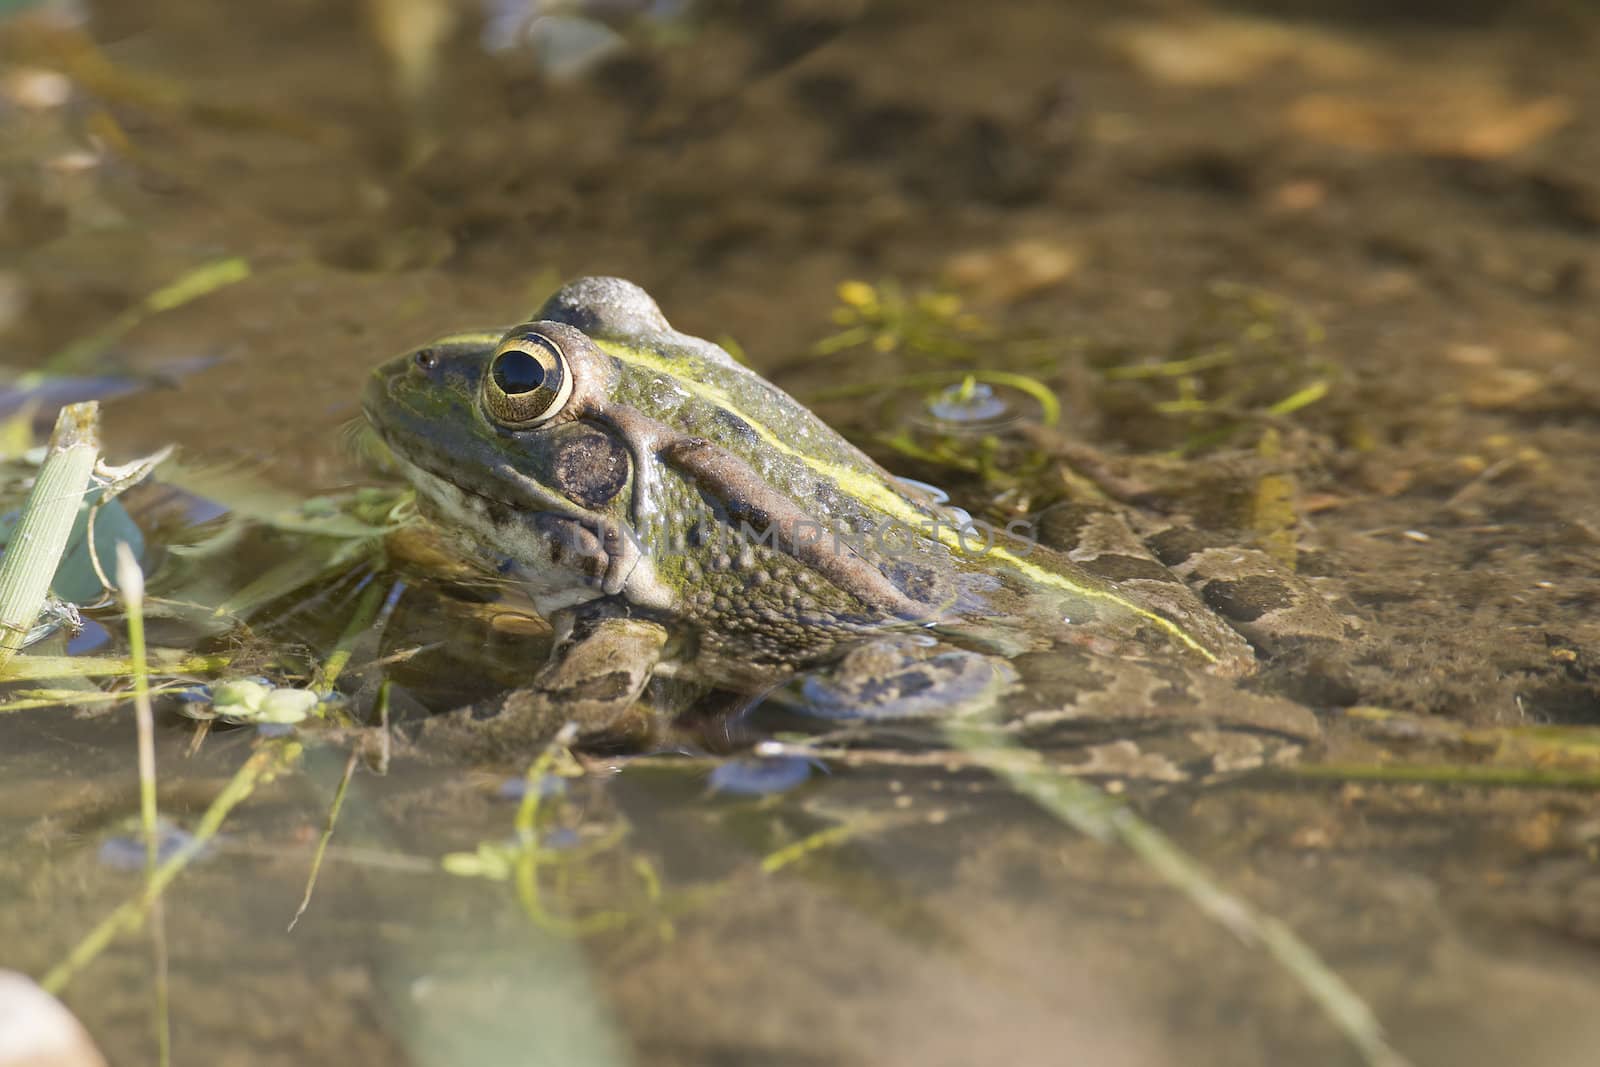 Frog in its environment with part of its body out of the water.